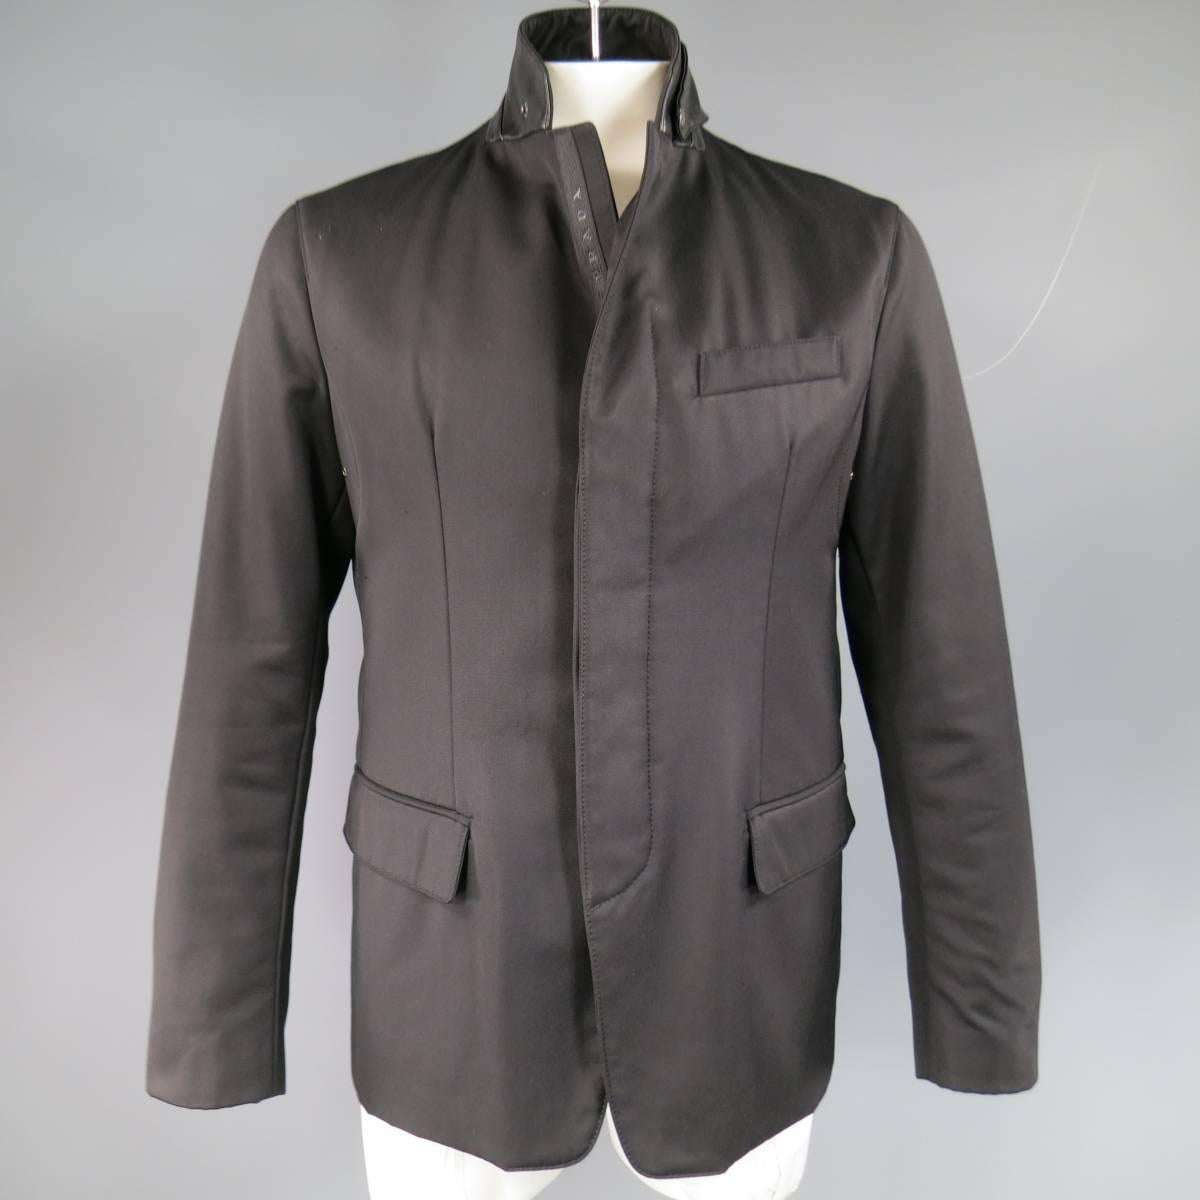 This unique PRADA sport coat comes in a lightly padded polyester twill and features a notch lapel, leather lined collar with snap storm flap, hidden placket button and zip closure, double flap pockets, and underarm grommet vents. Made in Italy.
